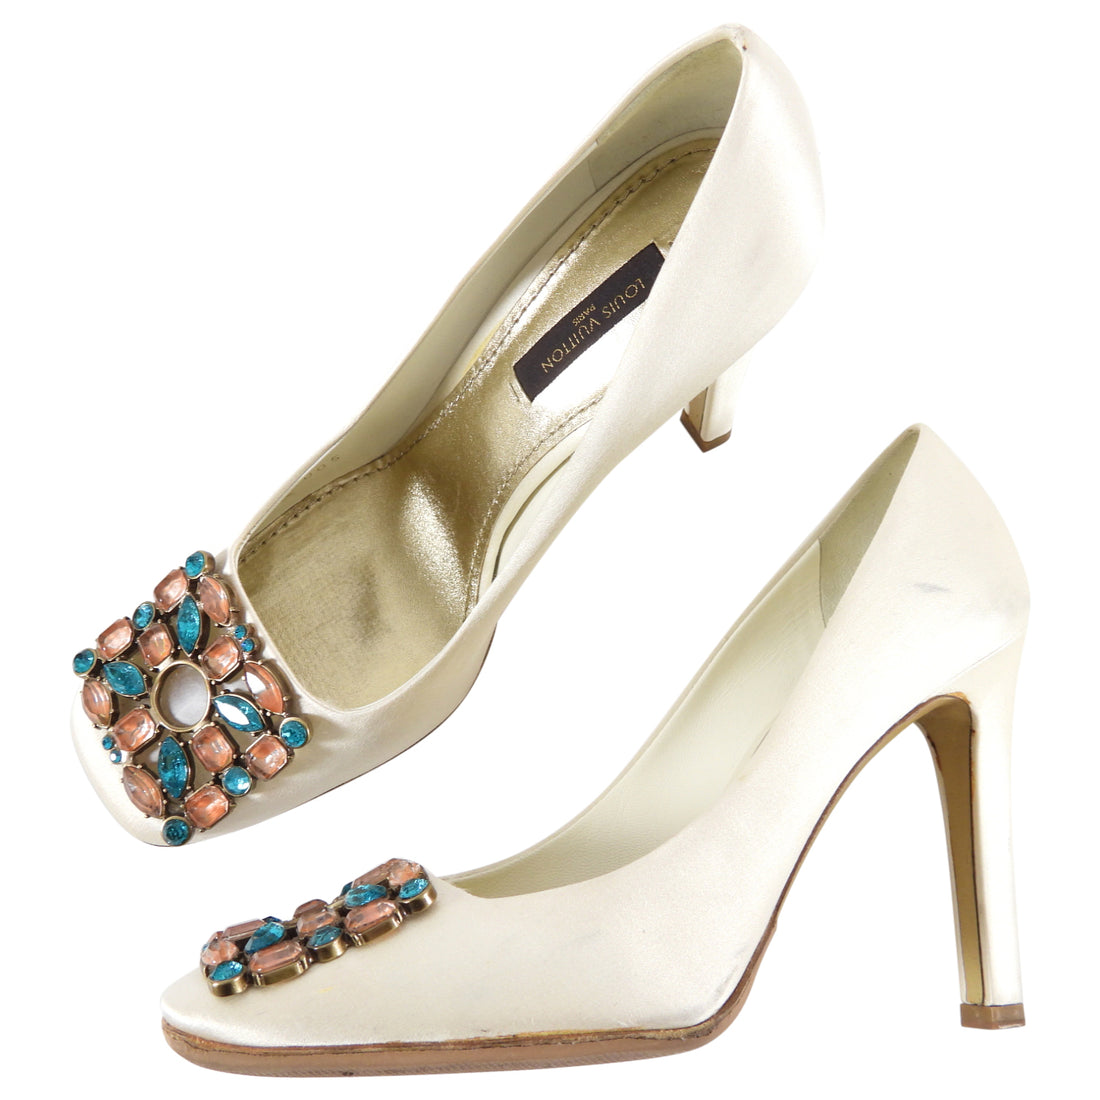 Louis Vuitton Ivory Satin and Jewel Pumps - USA 5.5 – I MISS YOU VINTAGE